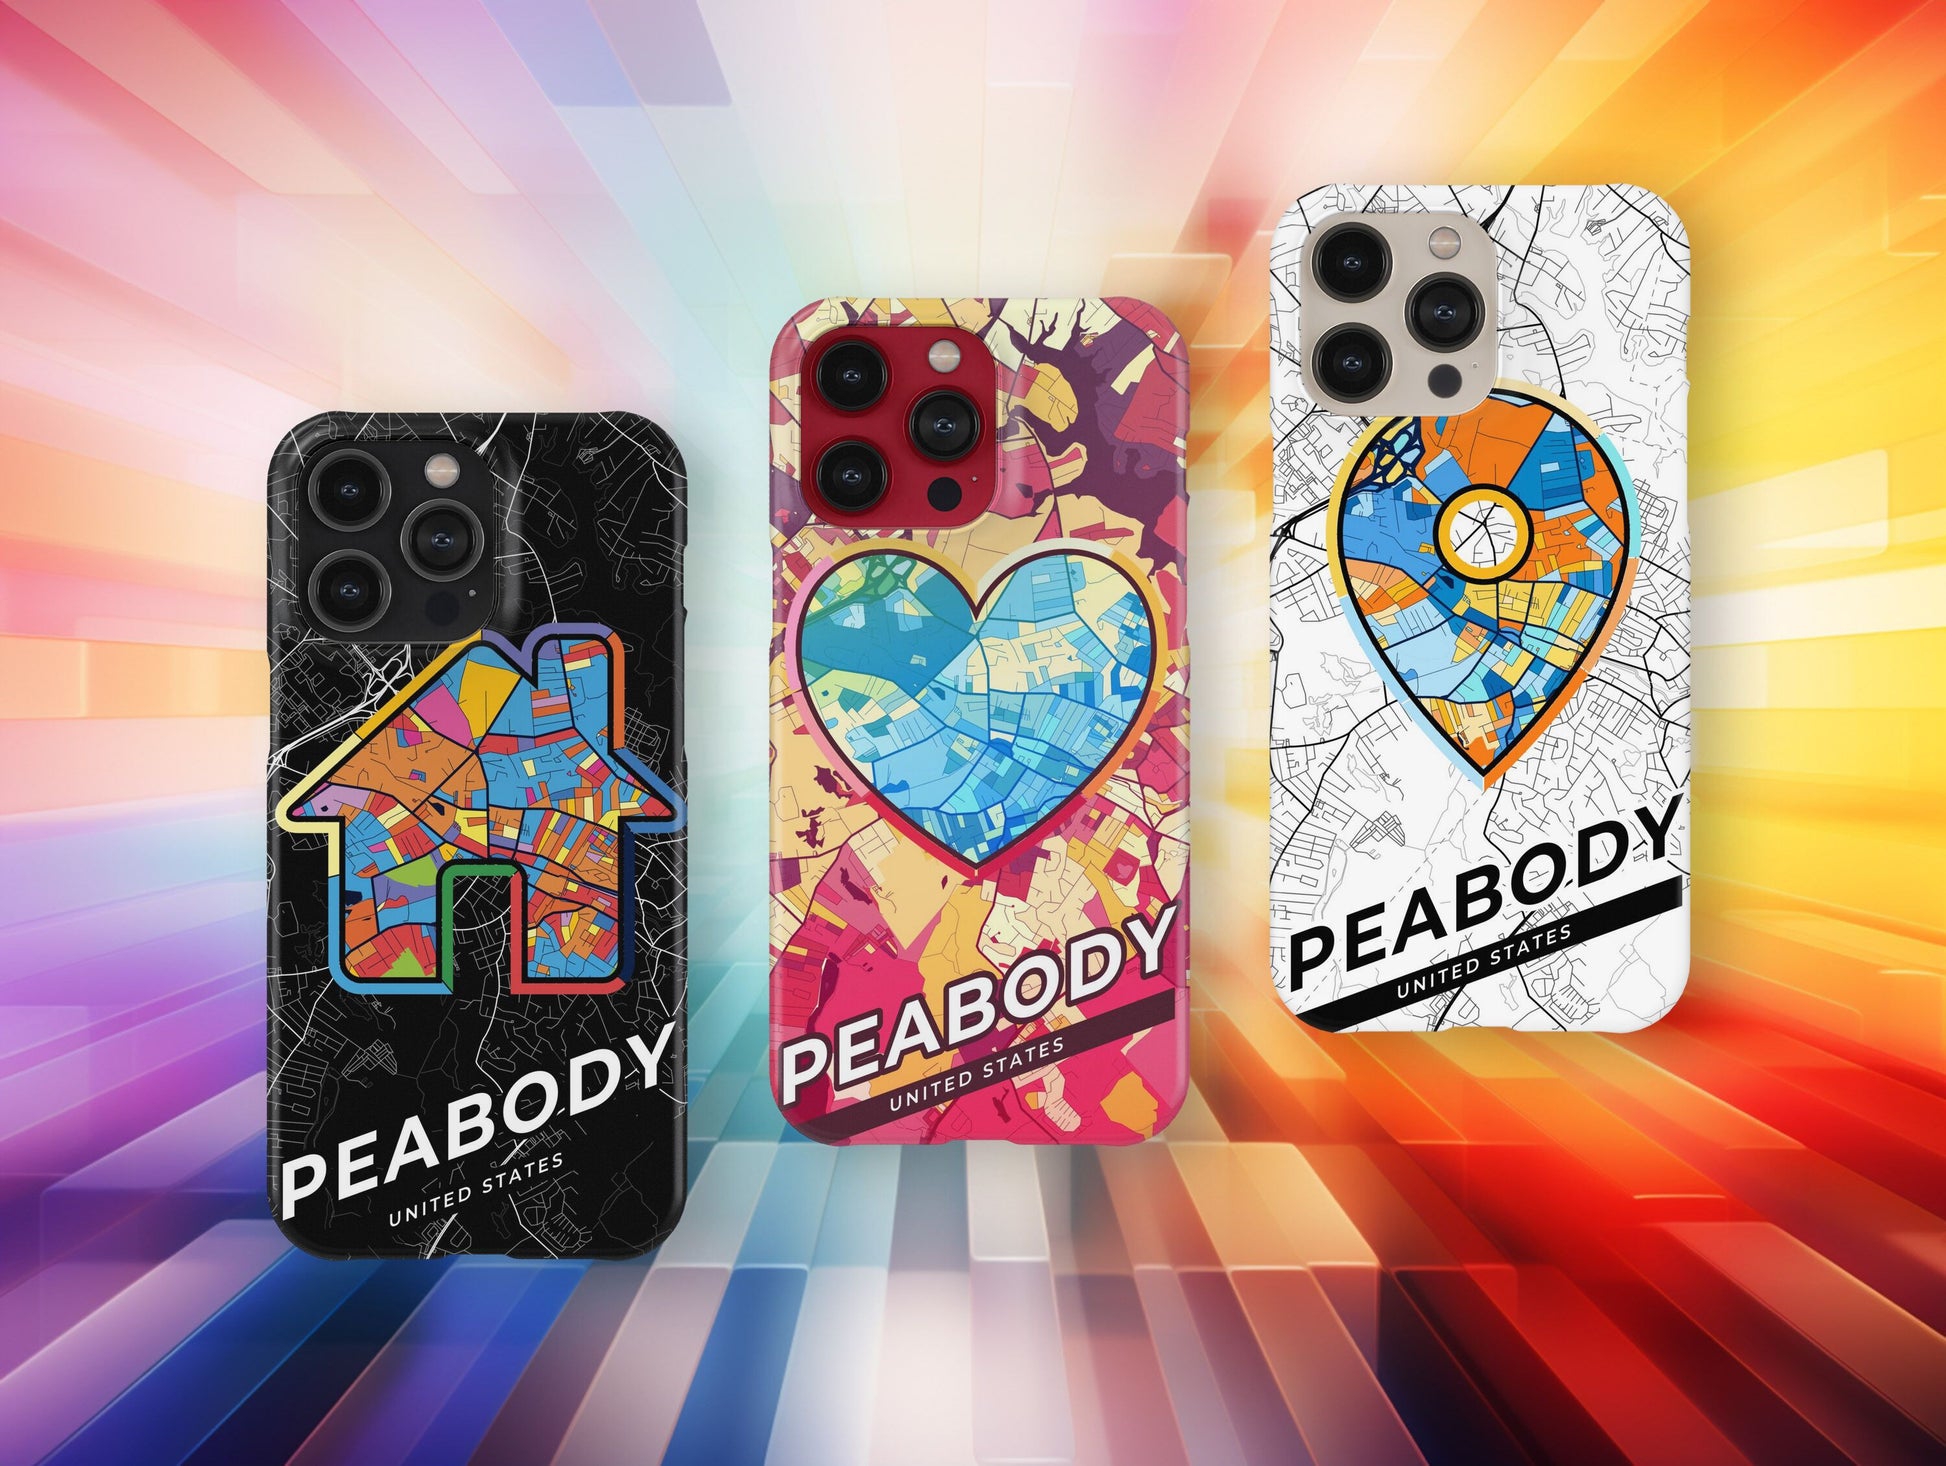 Peabody Massachusetts slim phone case with colorful icon